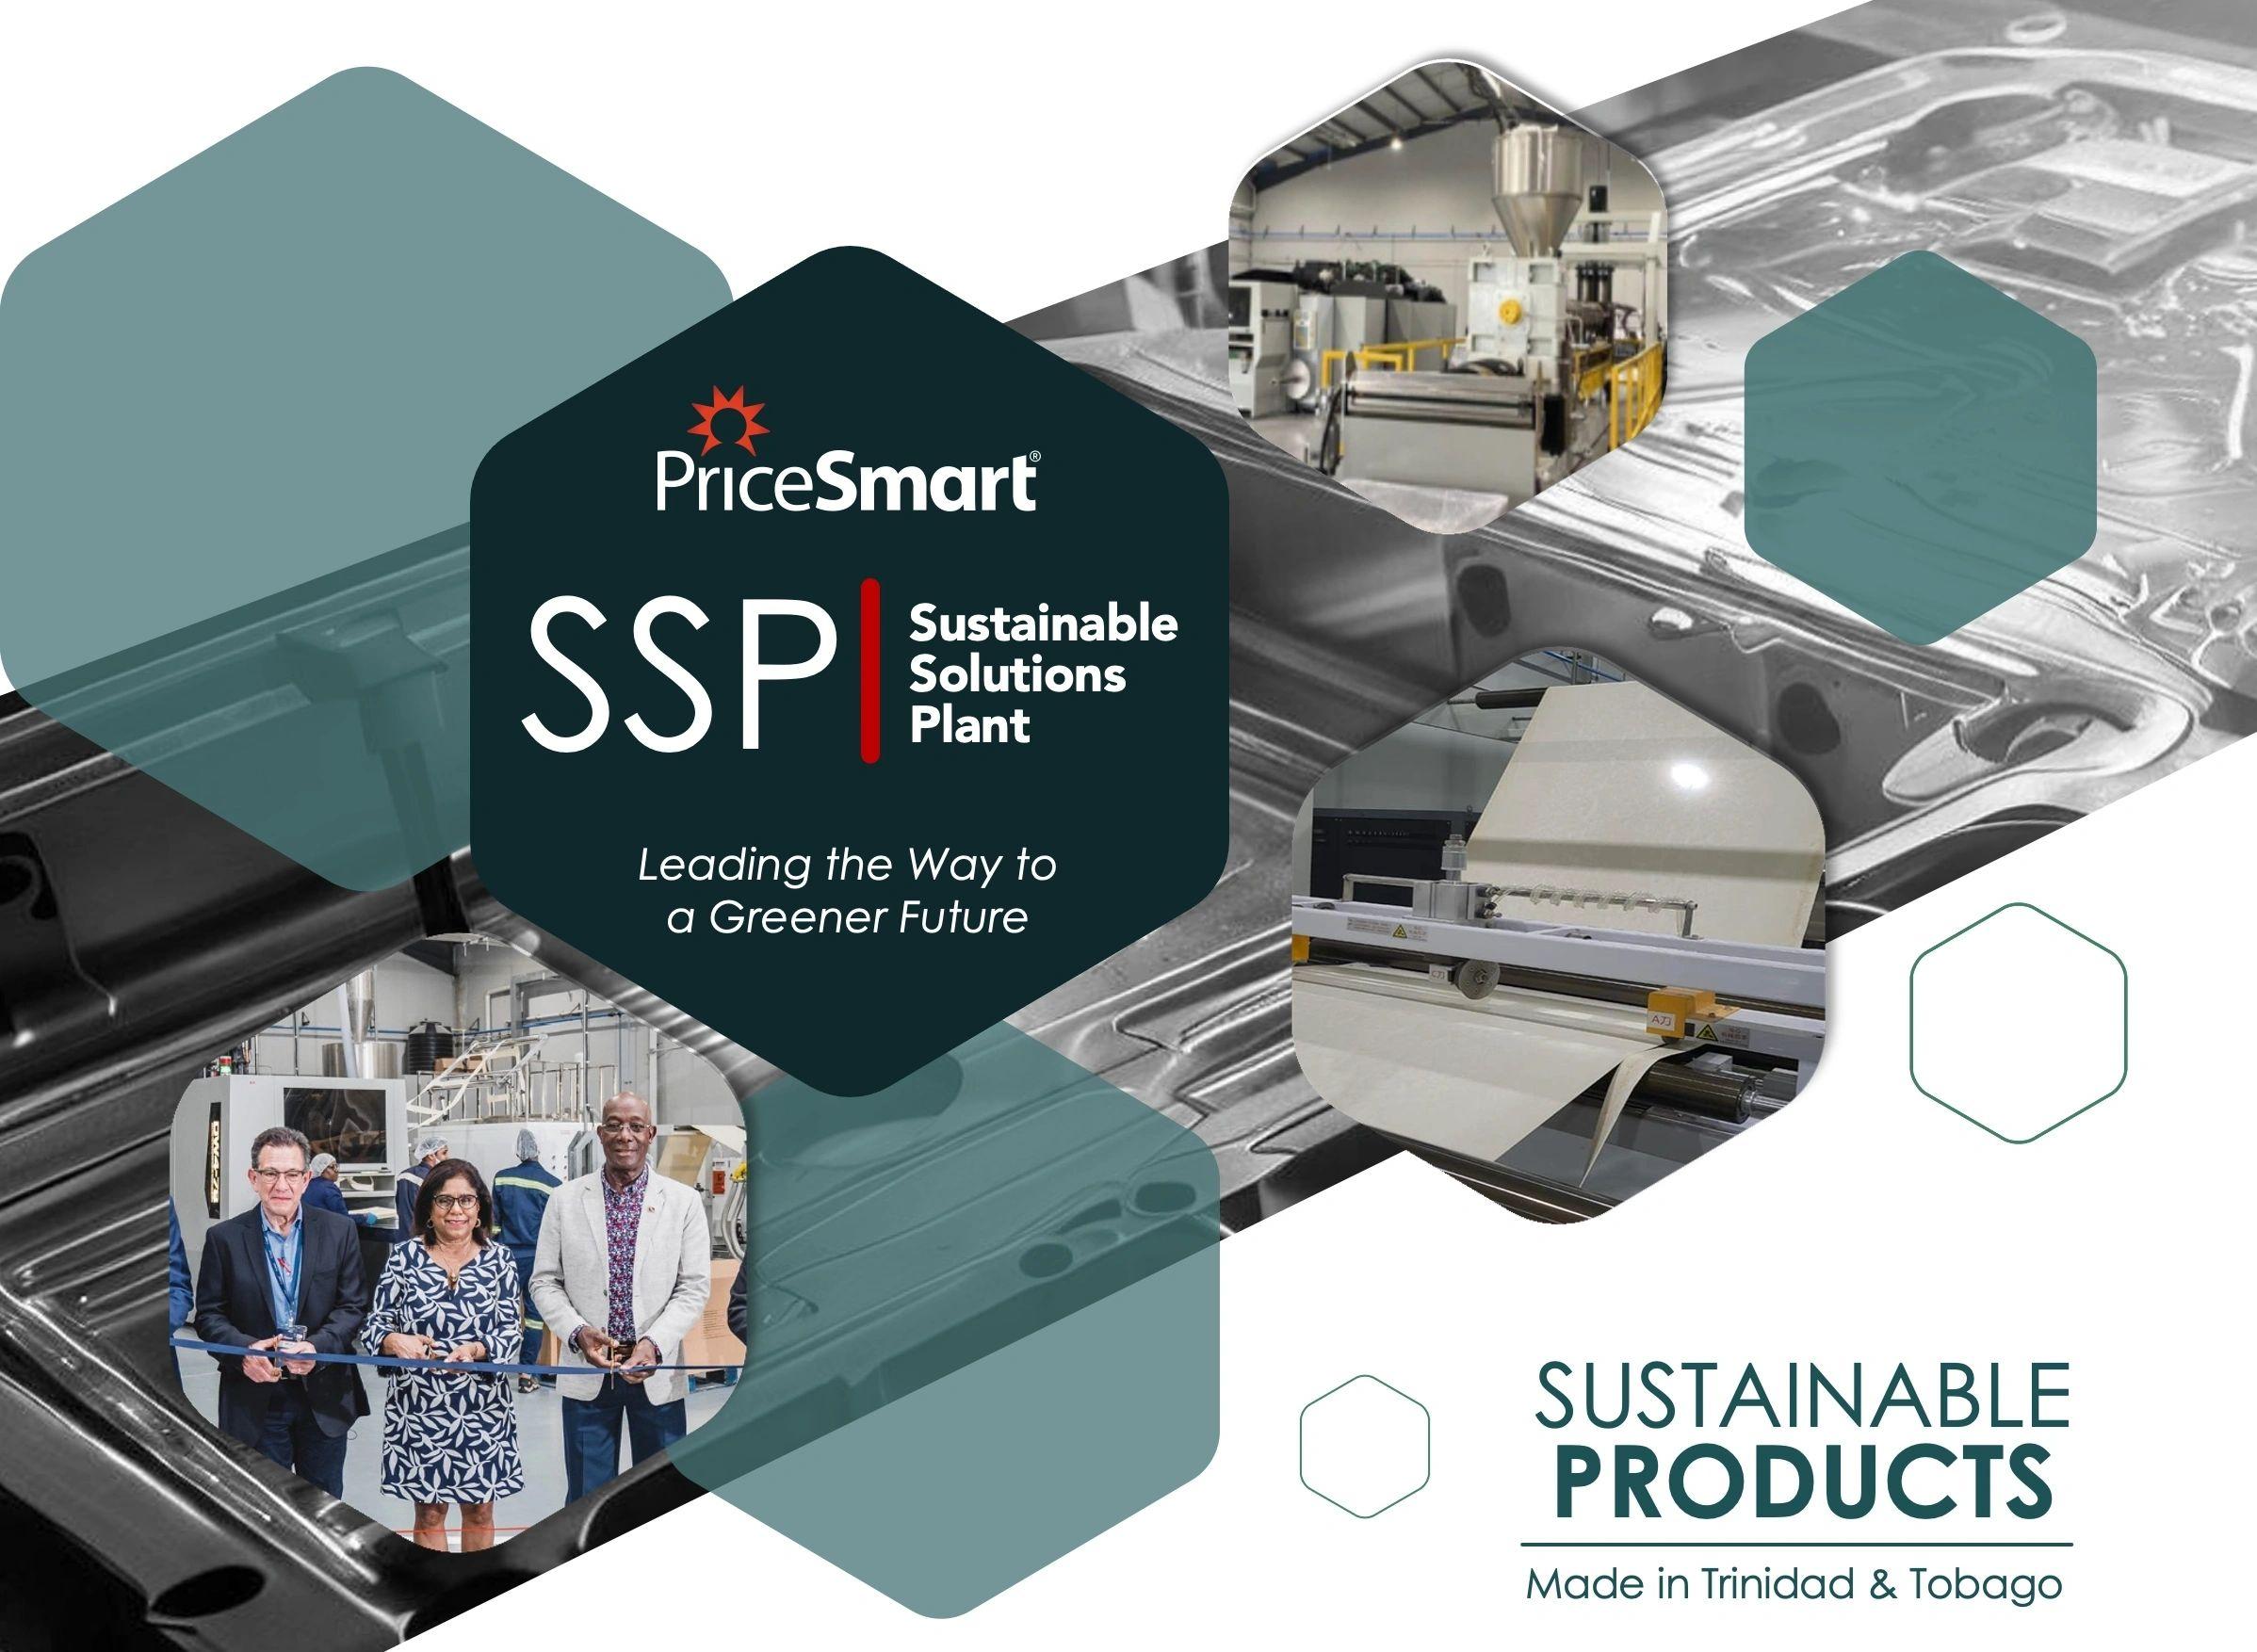 Product Inauguration of the Sustainable Solutions Plant image